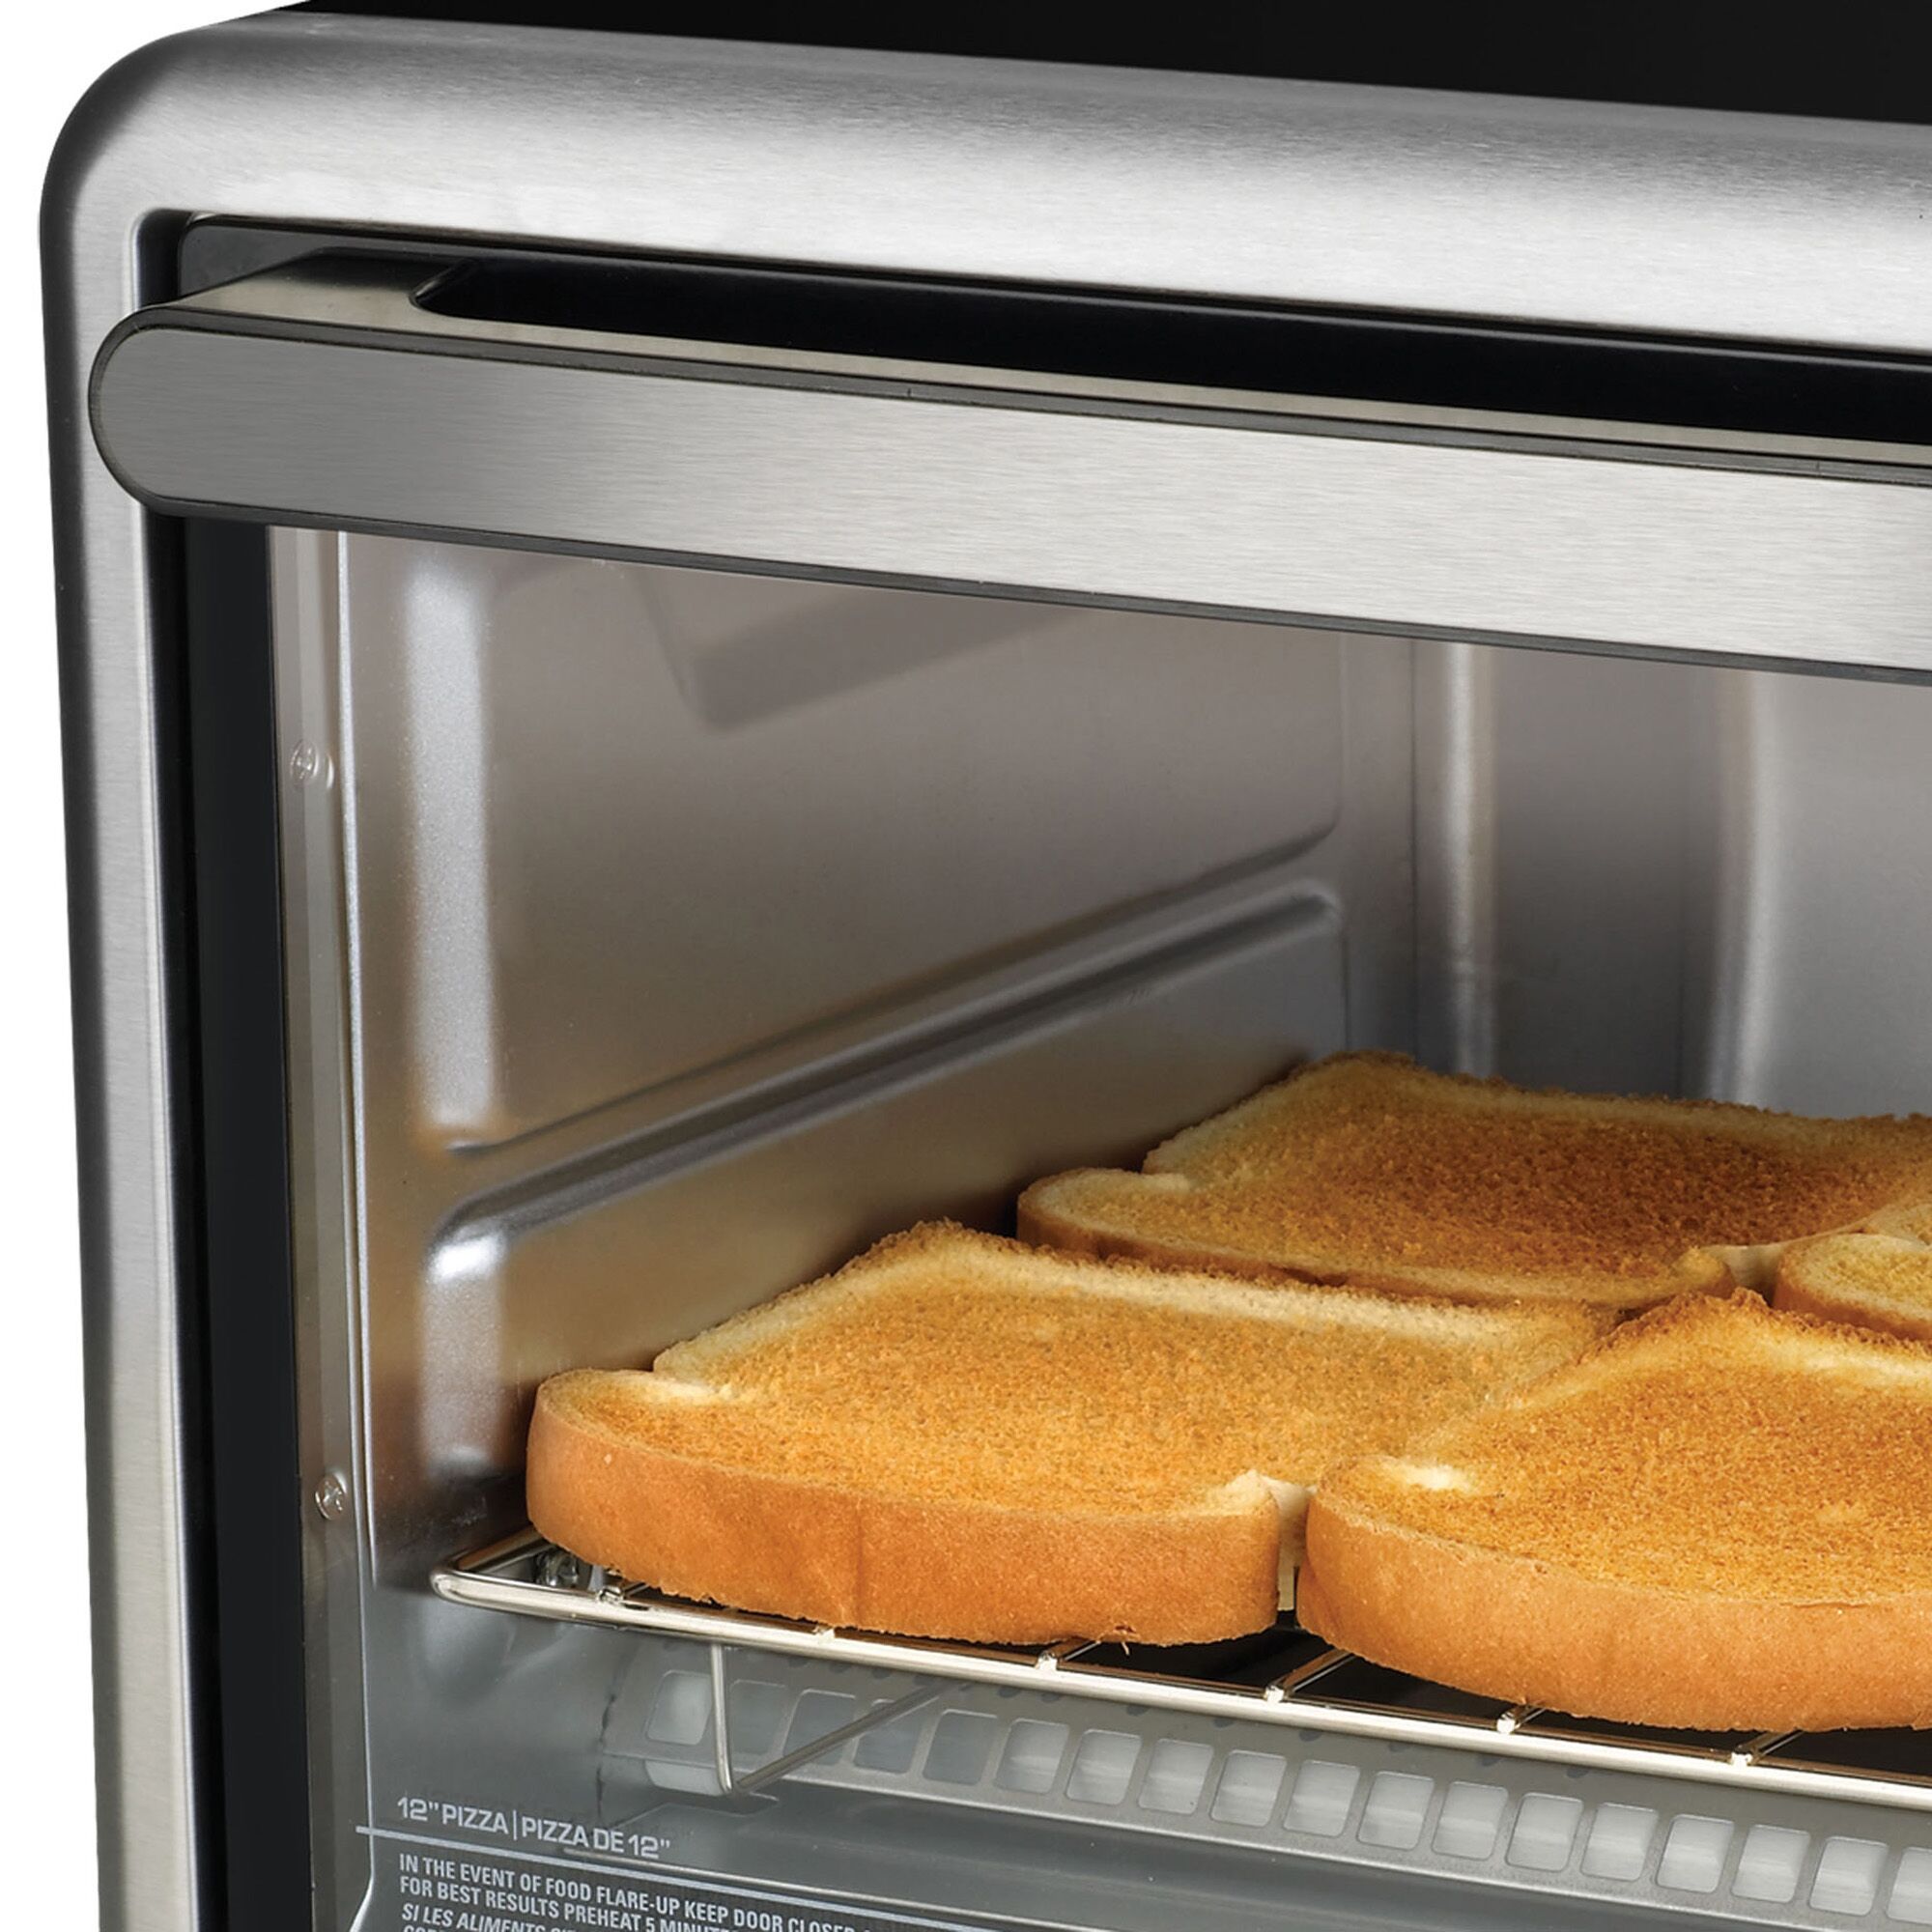 Countertop Toaster Oven with bread inside.